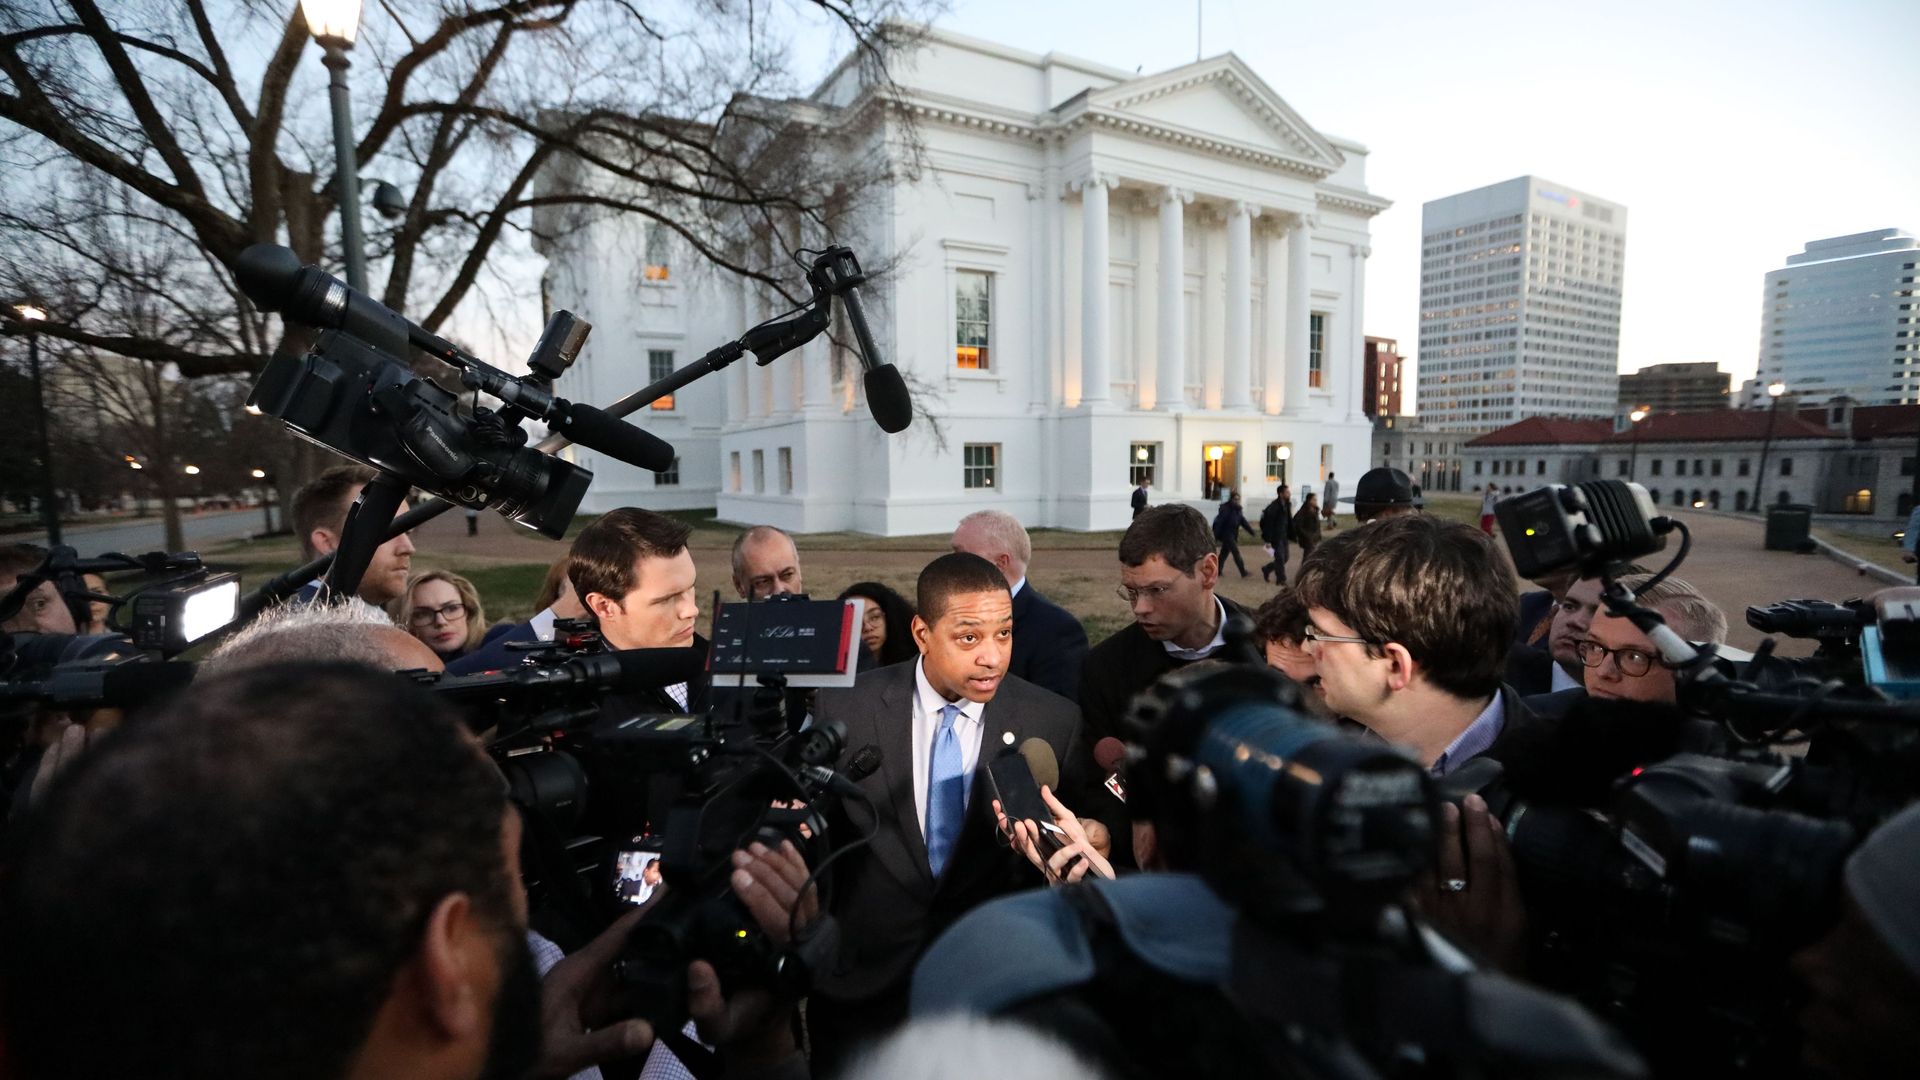 Justin Fairfax interviewed by swarm of reporters 